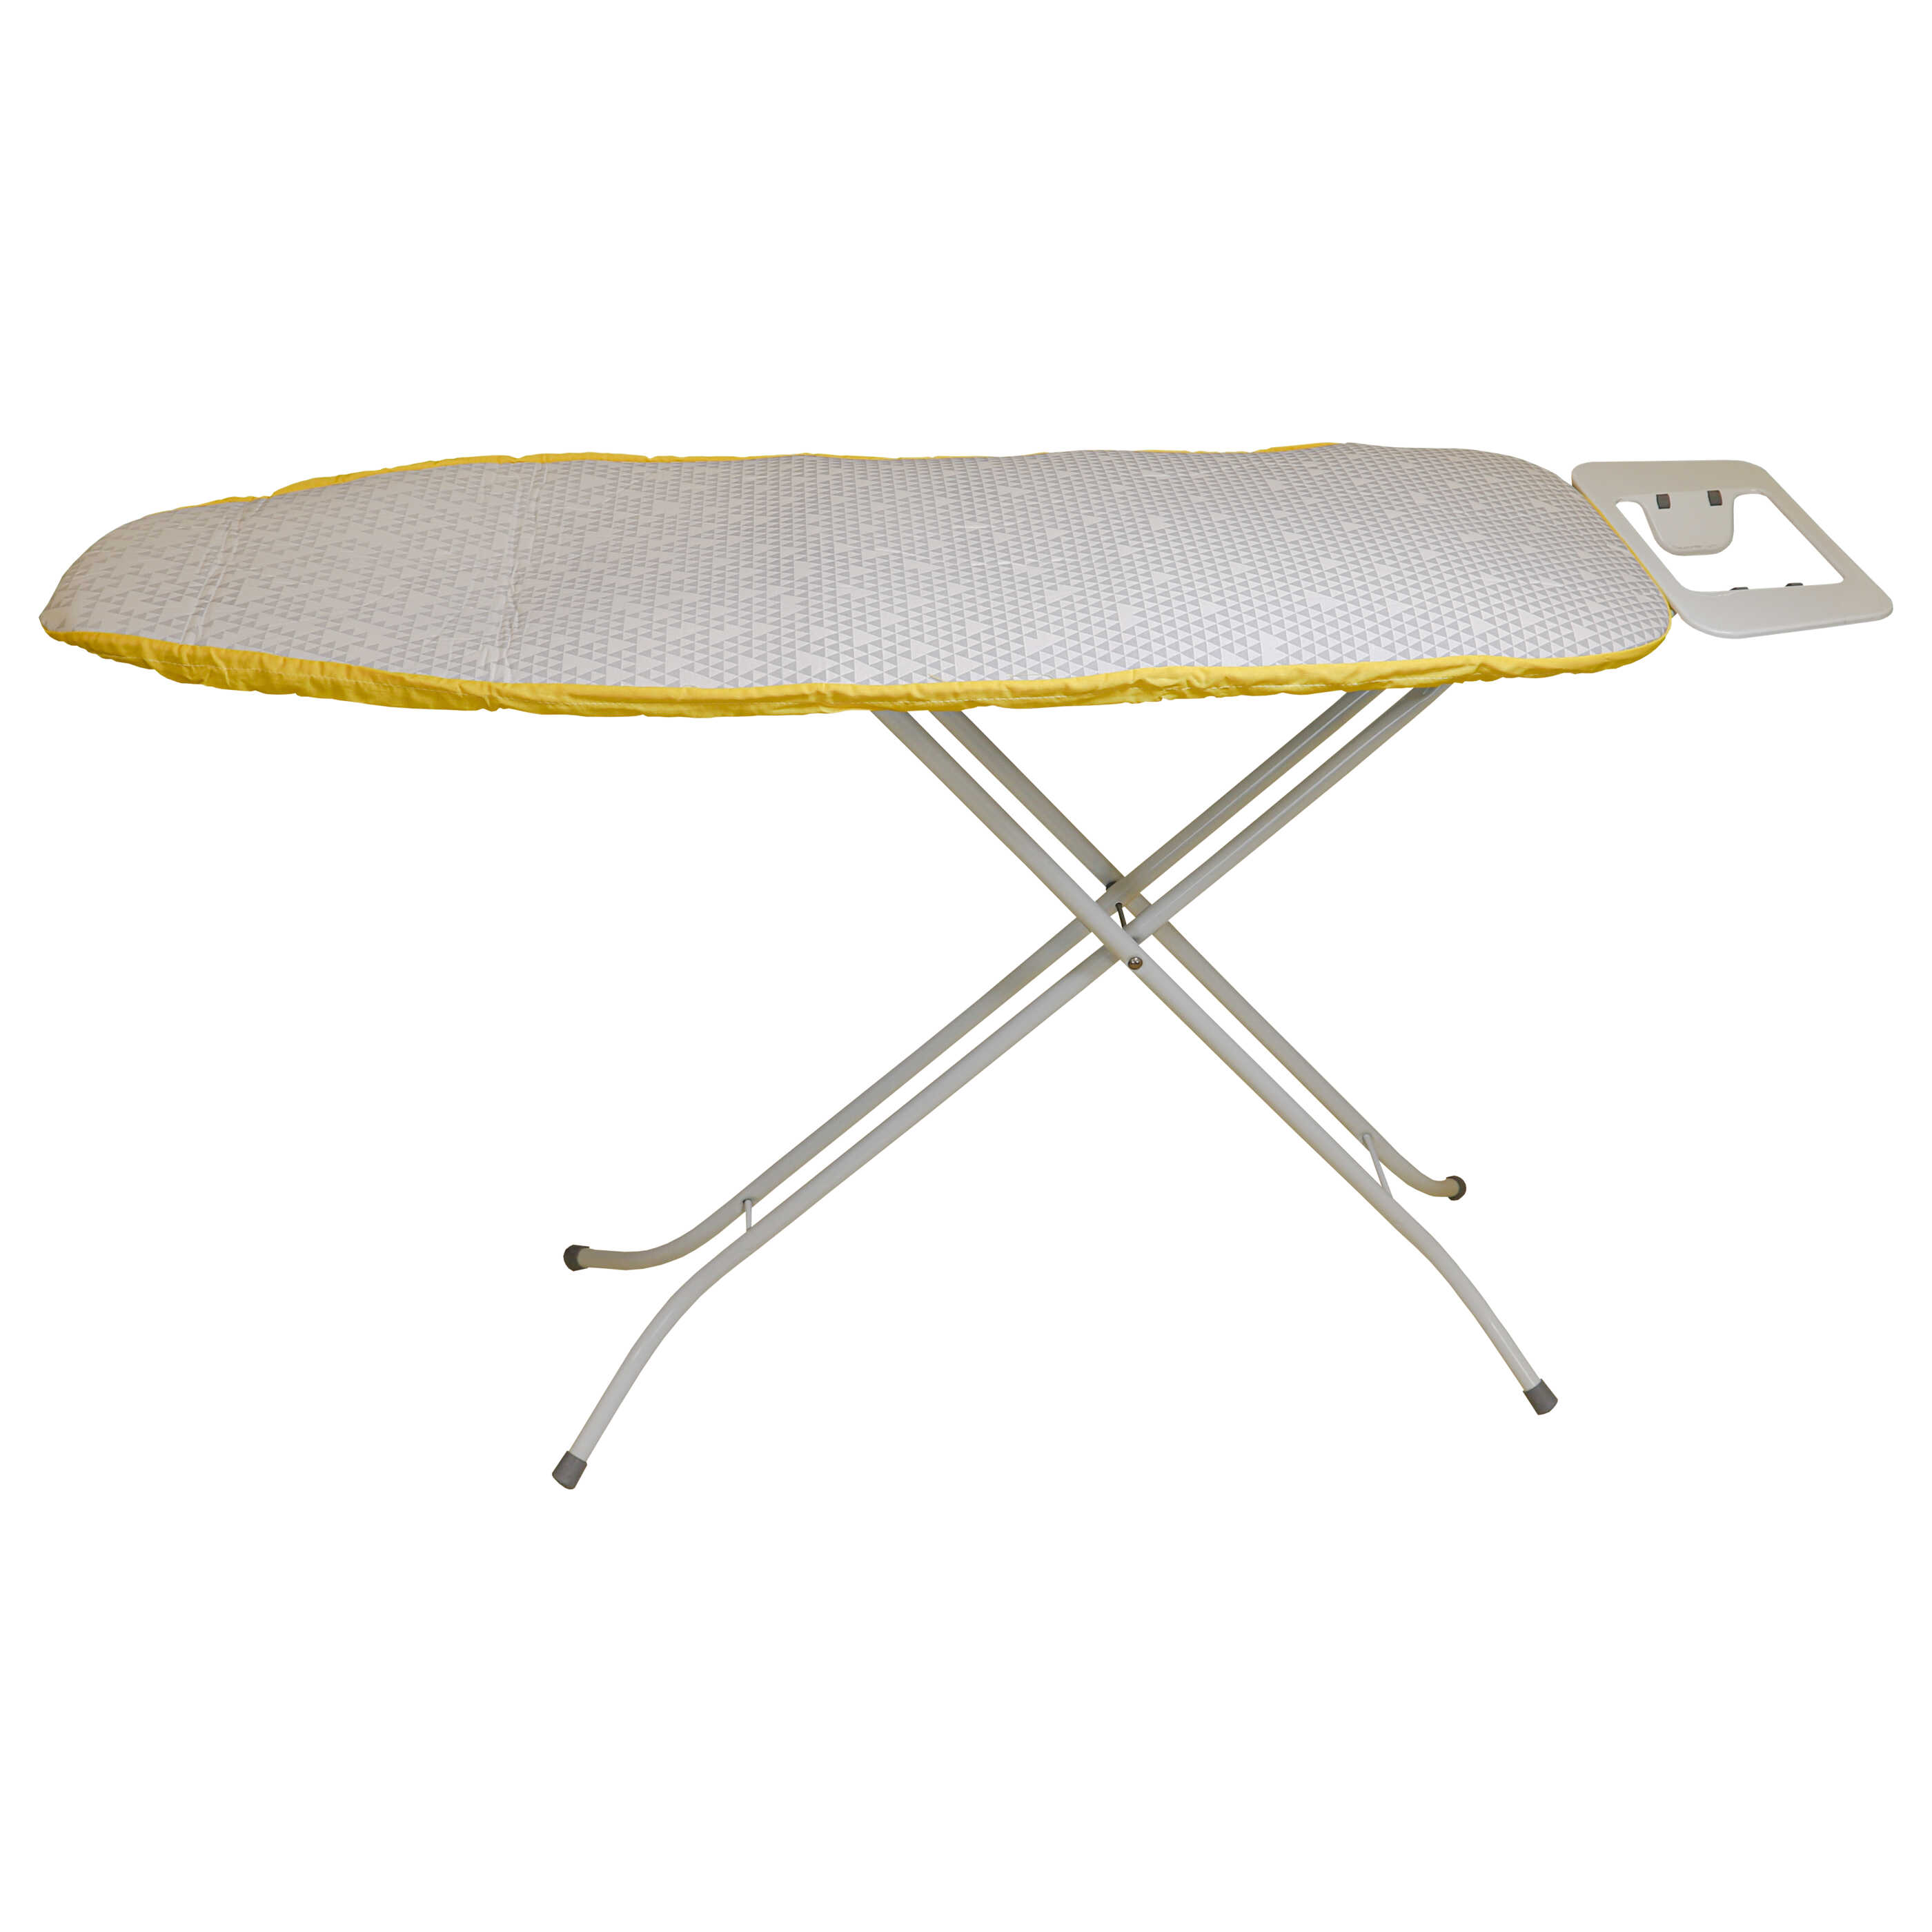 Ironing Board Cover replaces Kärcher 2.884-969.0 for Kärcher Active Ironing Board - Ironing Board Cover